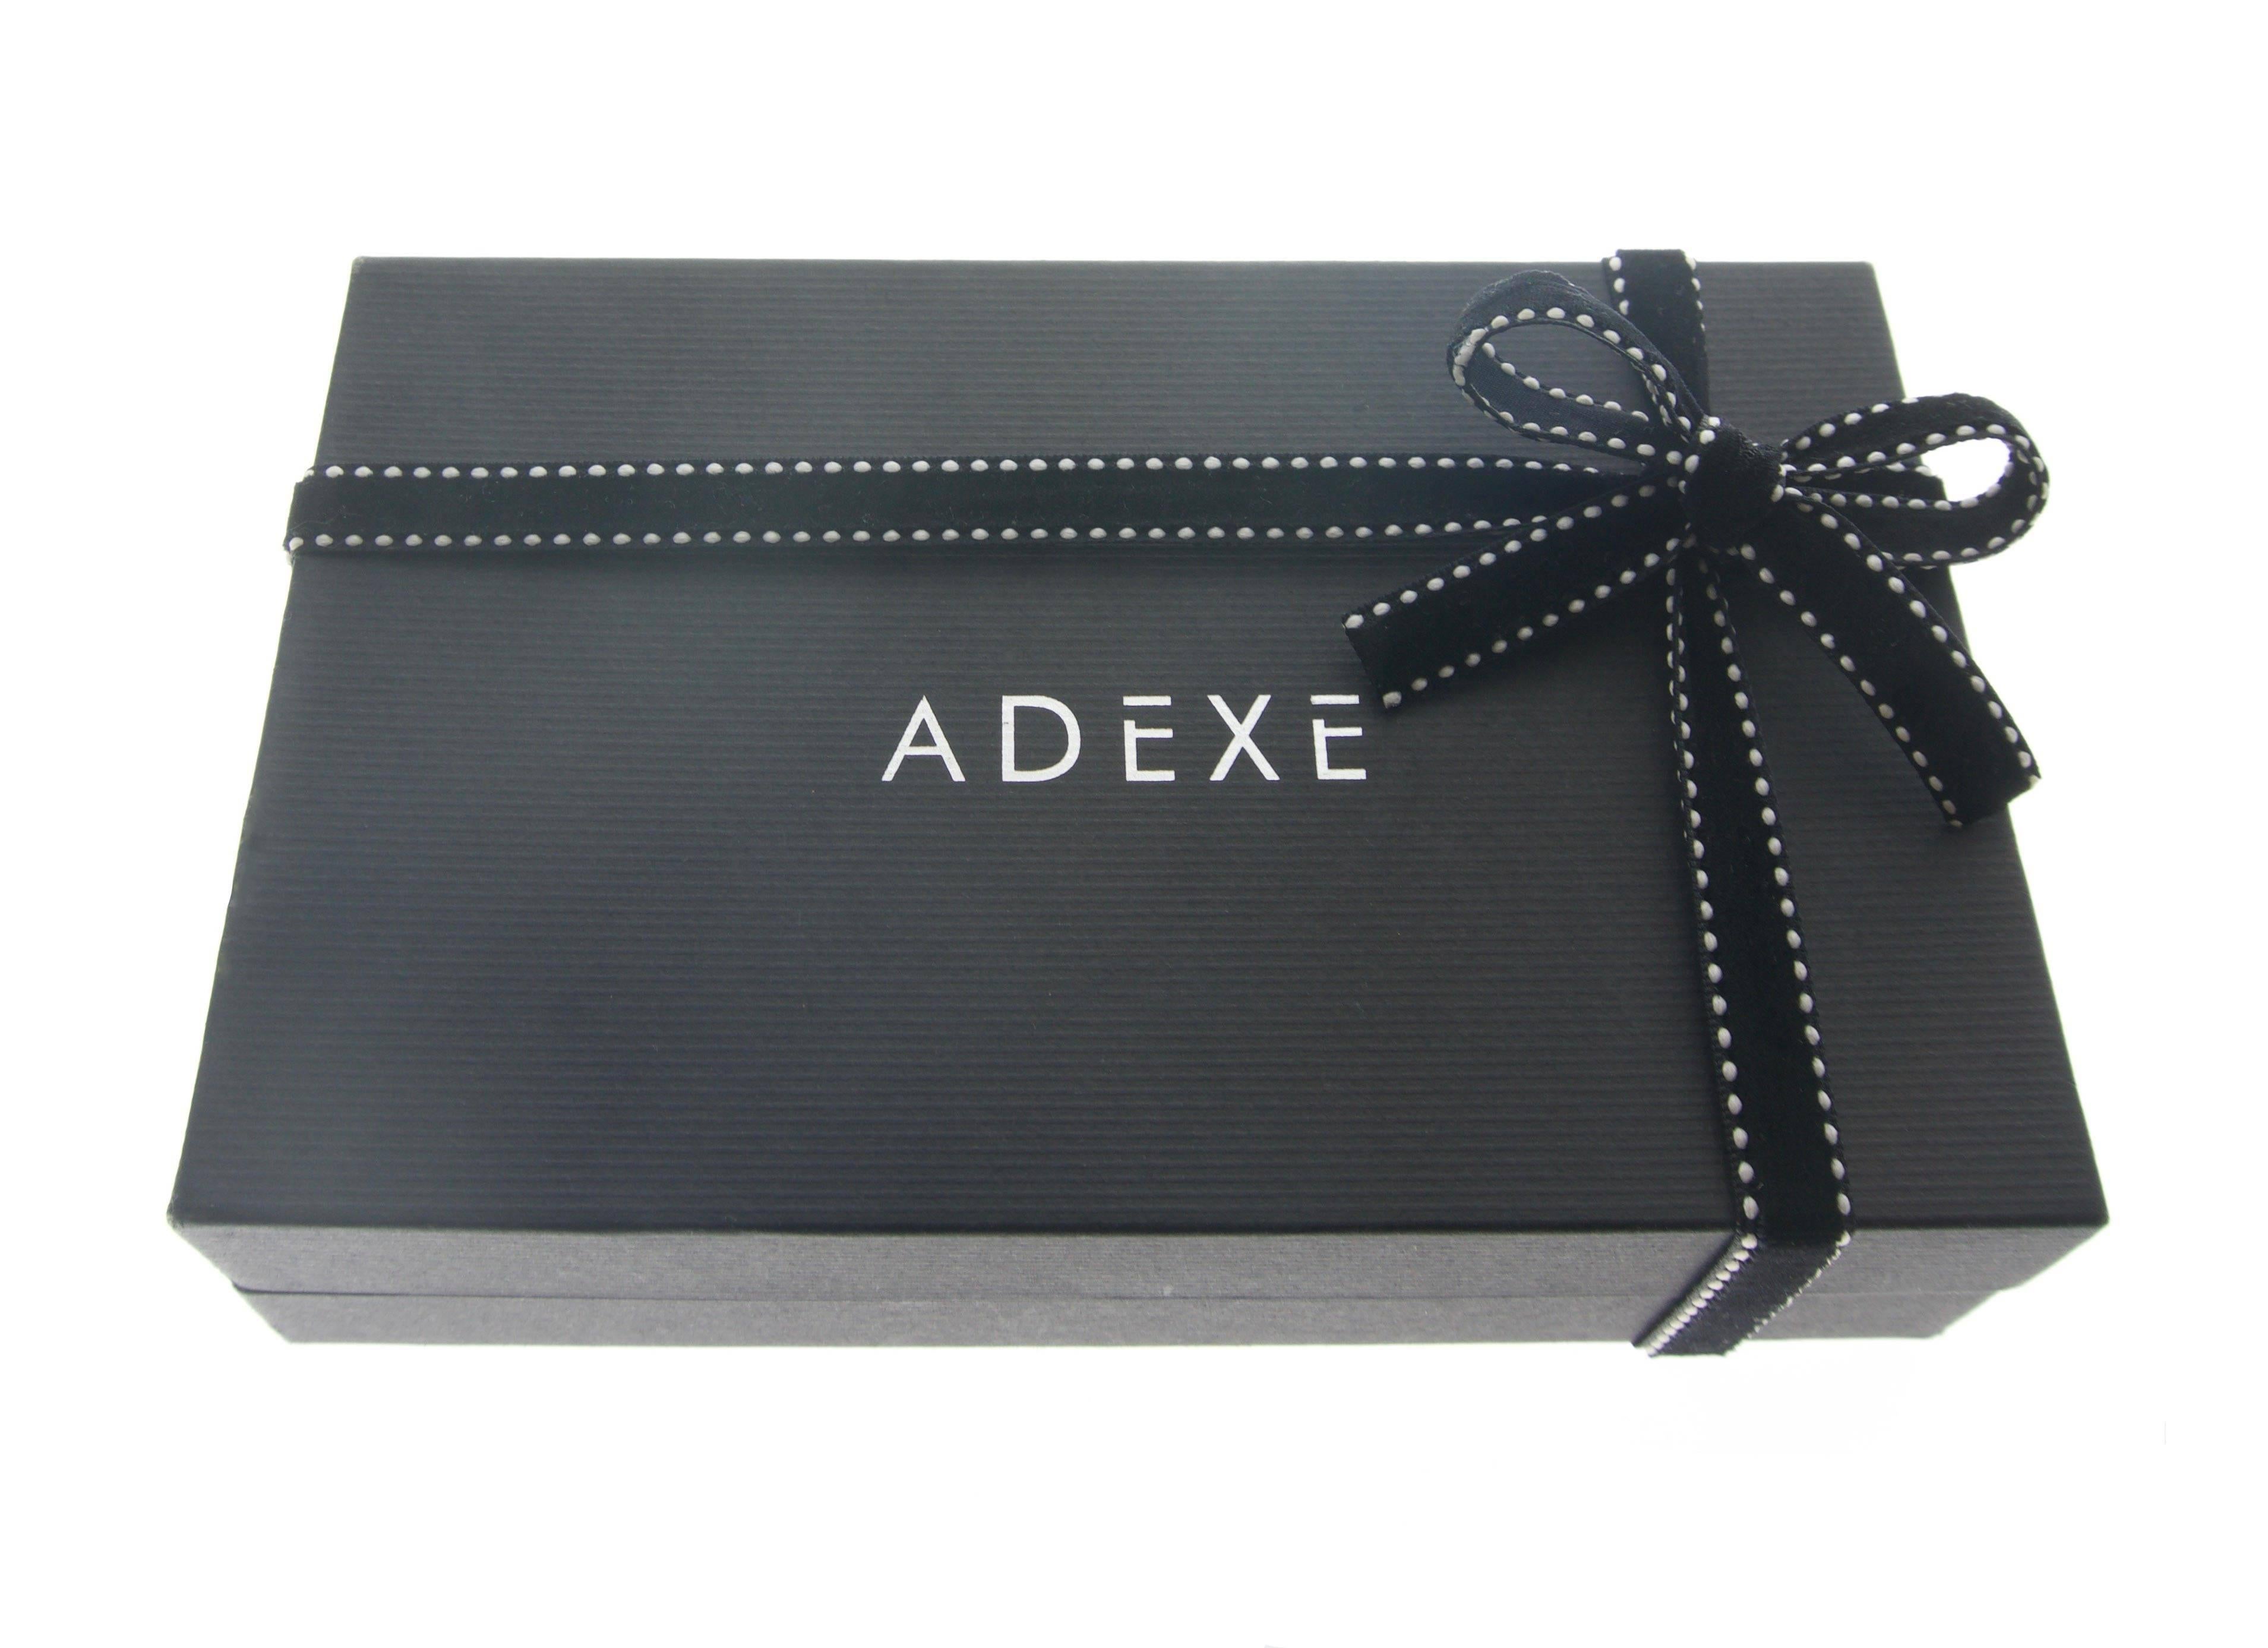 adexe watch price